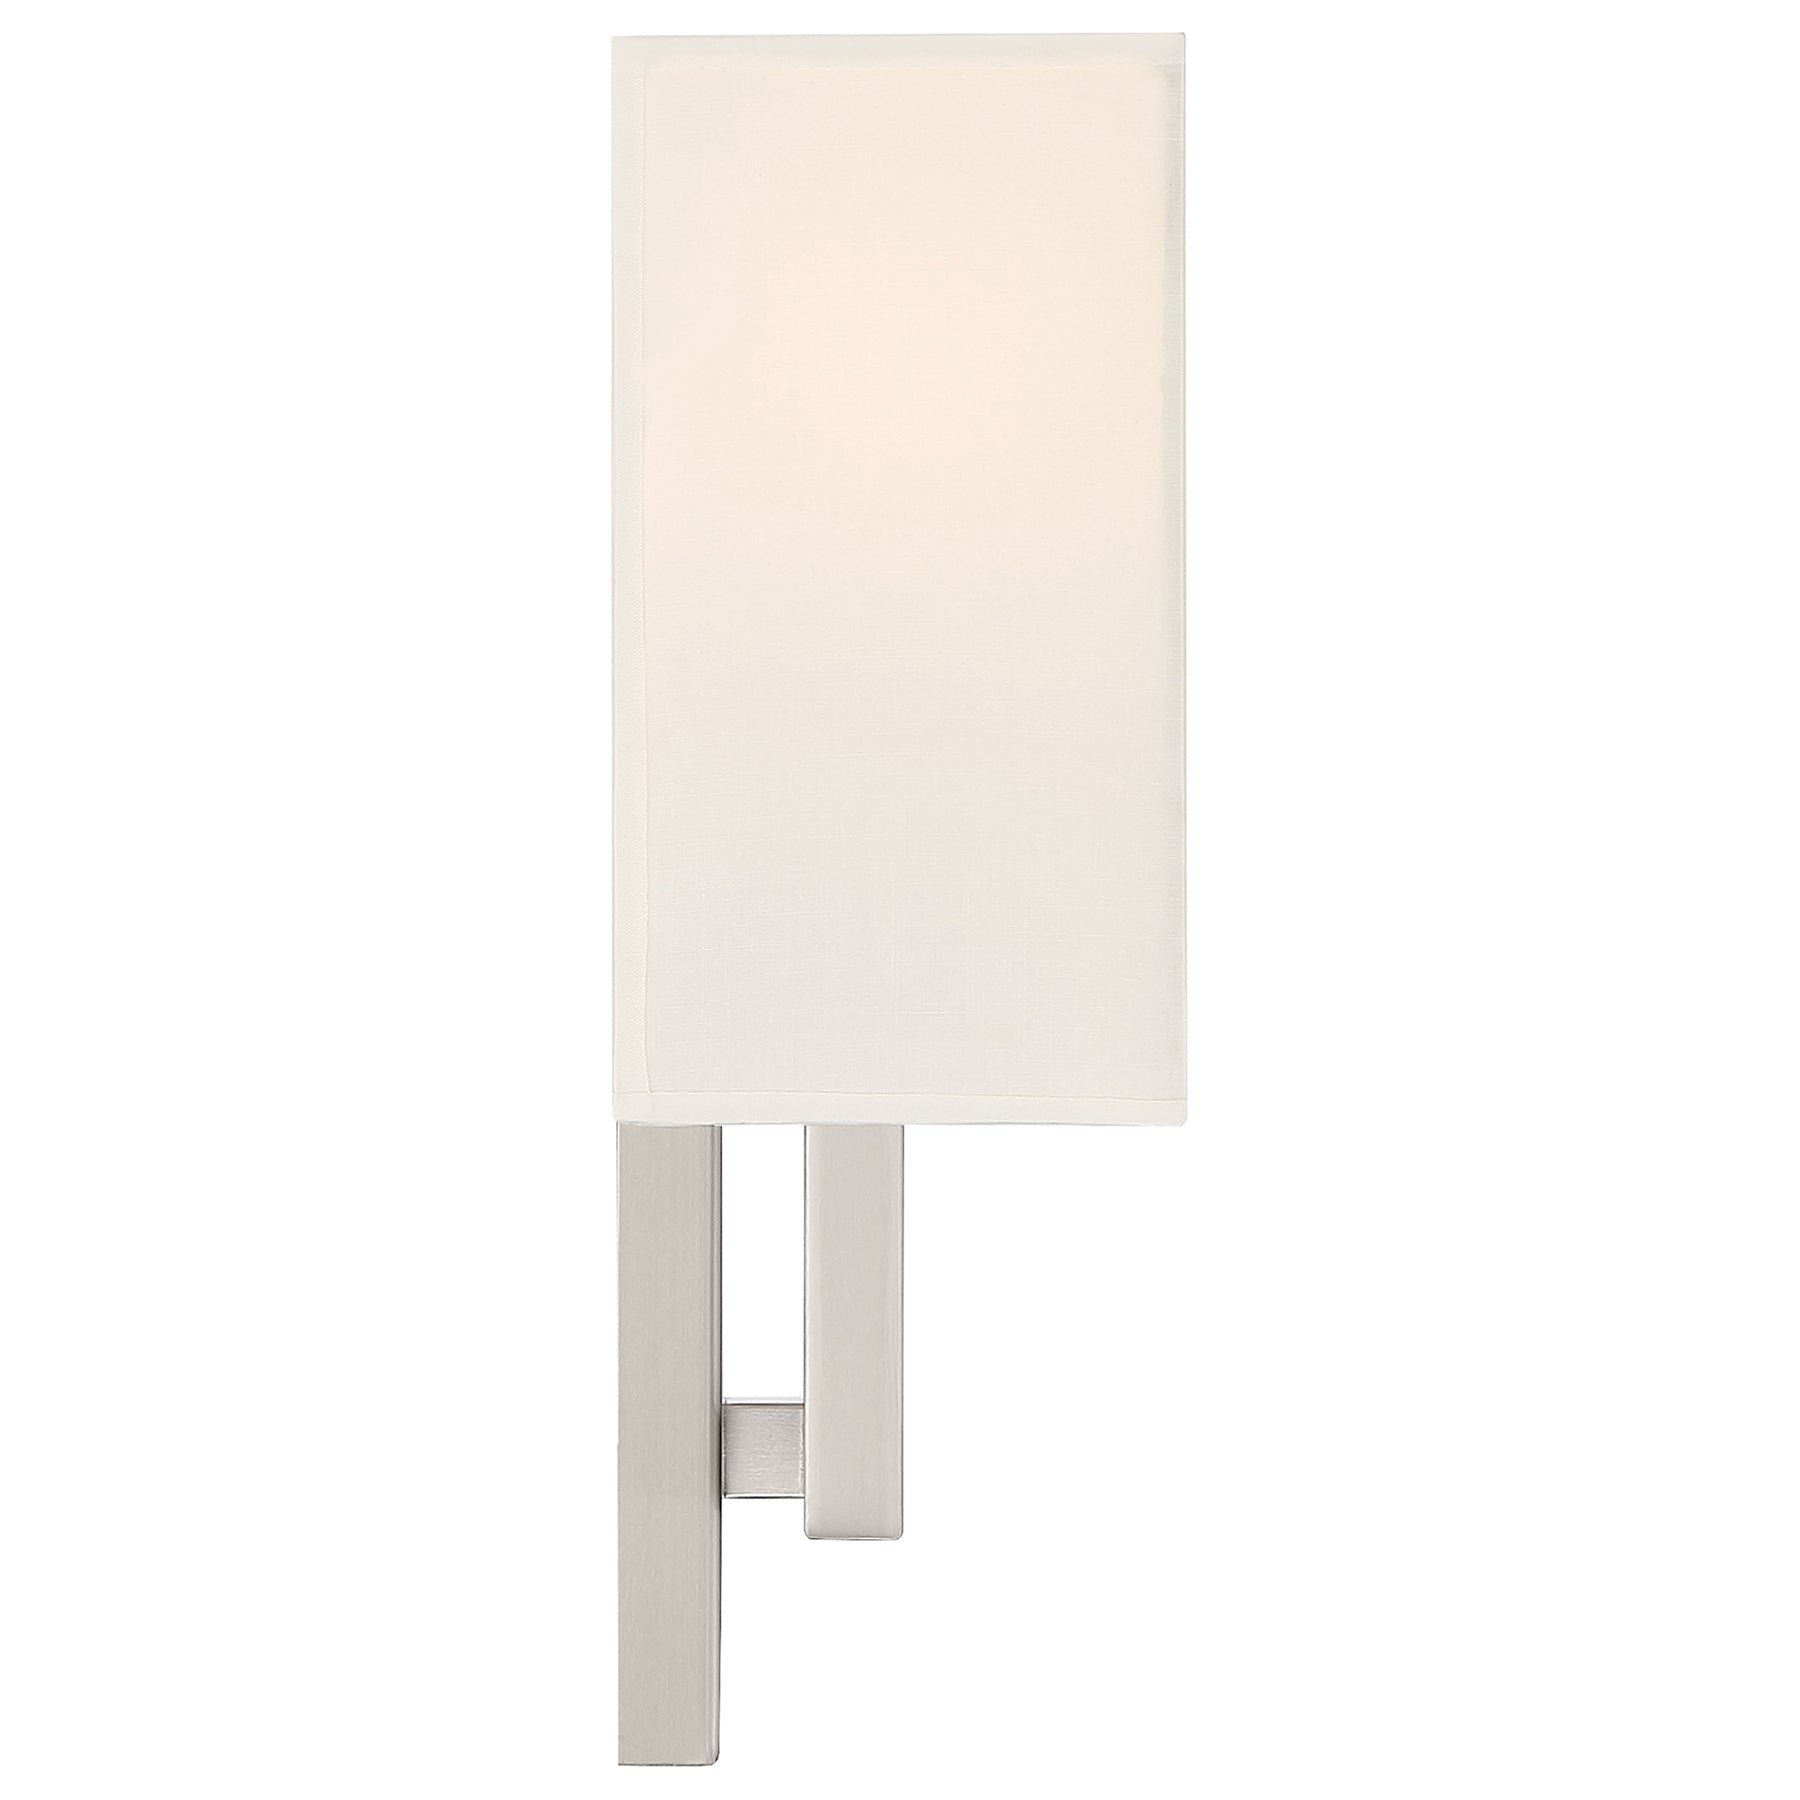 Mid Town 15in. LED Wall Lighting Sconce (Brushed Steel)